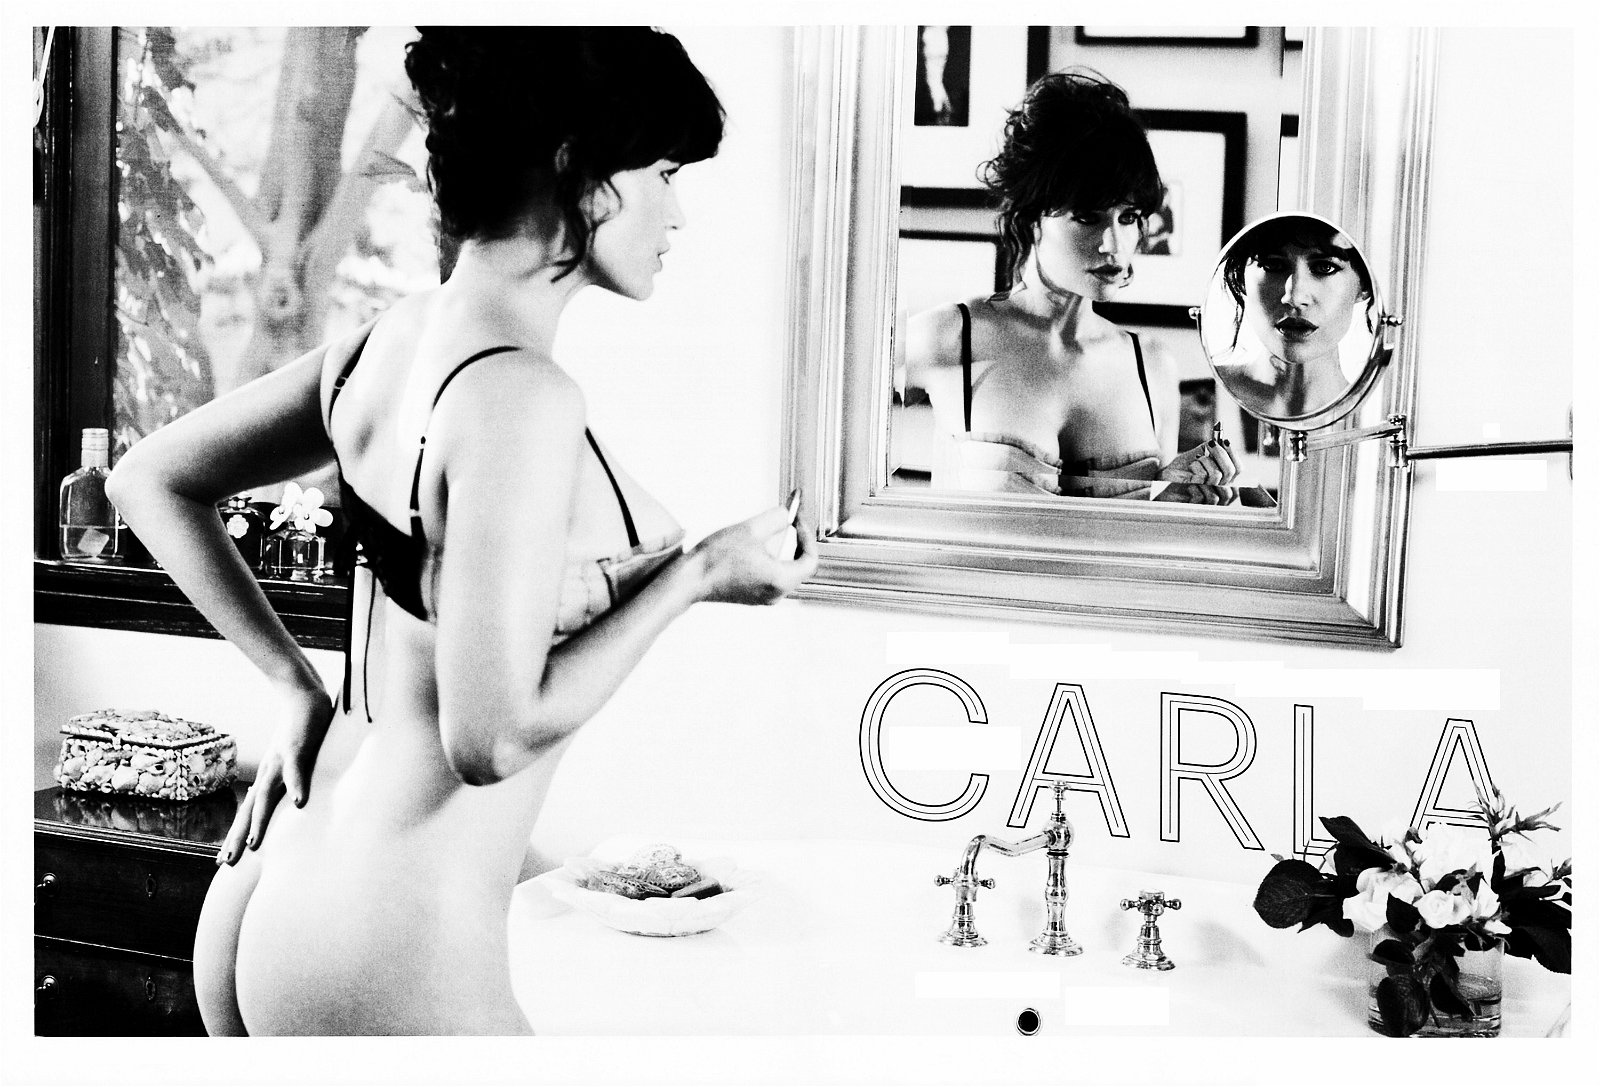 Photo by nudes-des-artiste with the username @nudes-des-artiste,  March 16, 2020 at 12:51 PM. The post is about the topic Black and White and the text says 'Carla Gugino’s tits aren’t the only thing she has to offer besides her face and talent. Check out that incredible ass!

#carlagugino #celebrity #greatass #lingerie #bigtits #artistic'